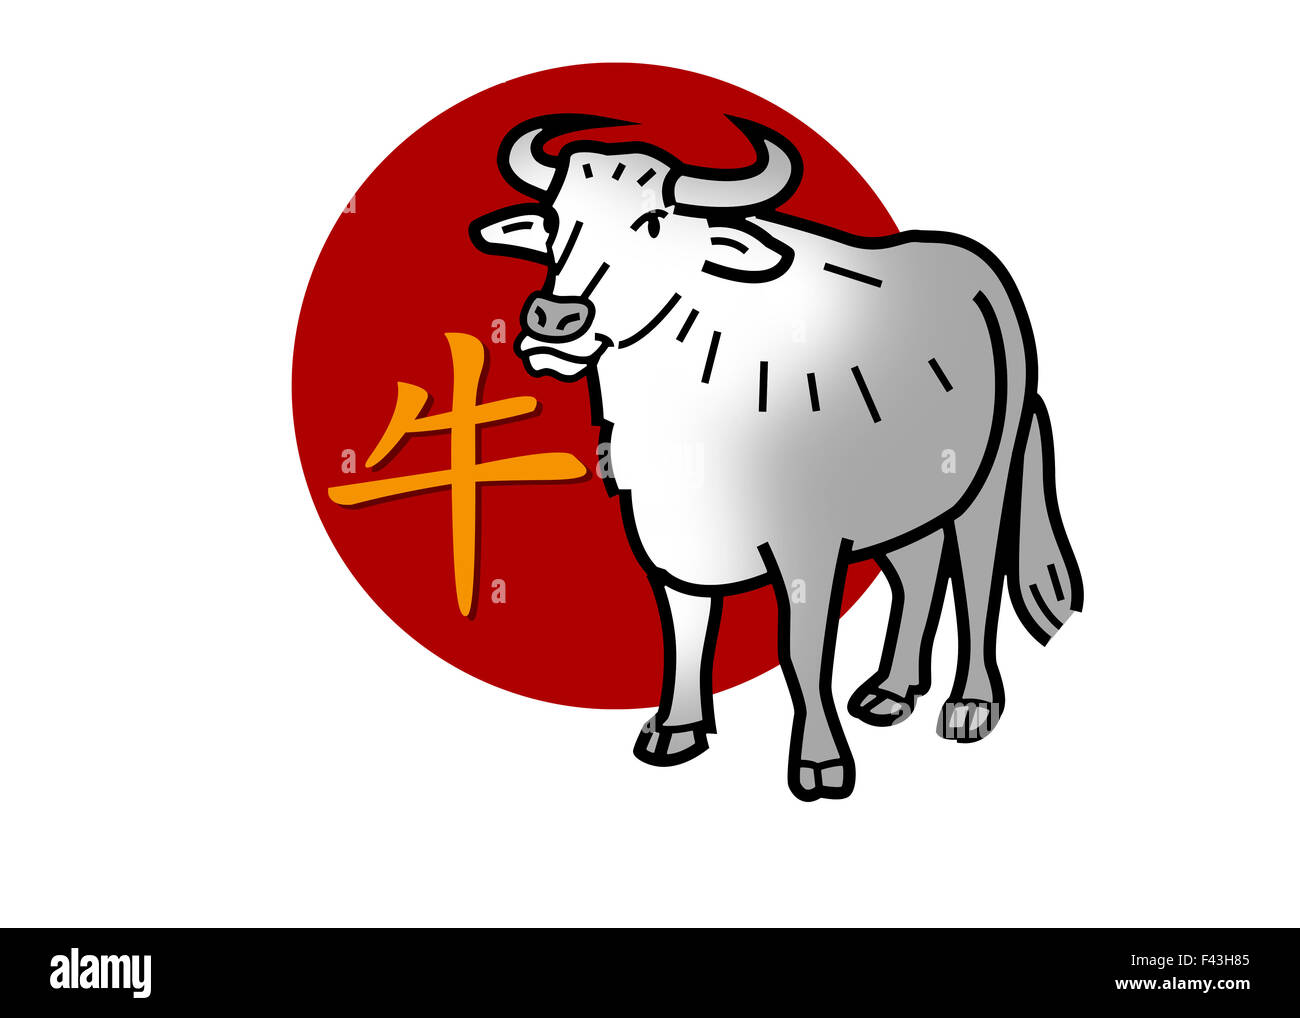 Chinese zodiac sign for year of the ox Stock Photo